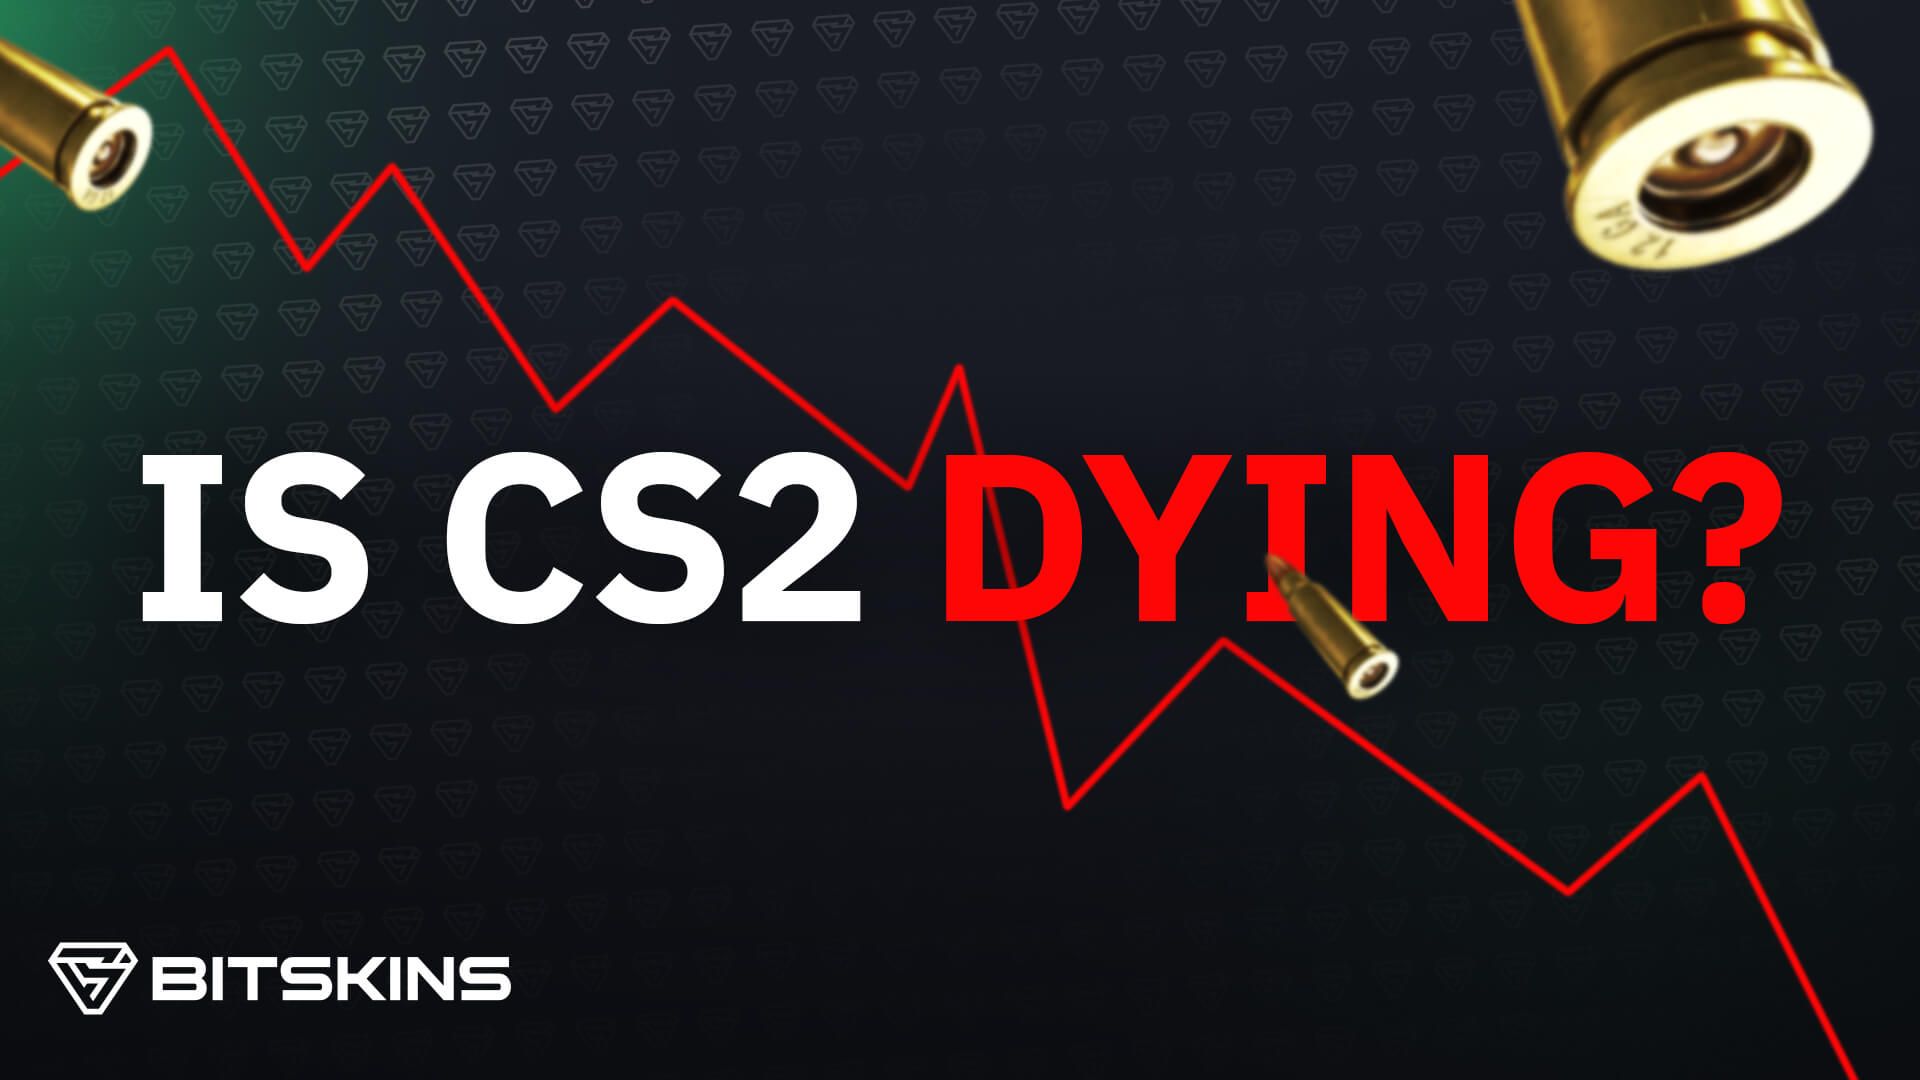 Is CS2 Dying?